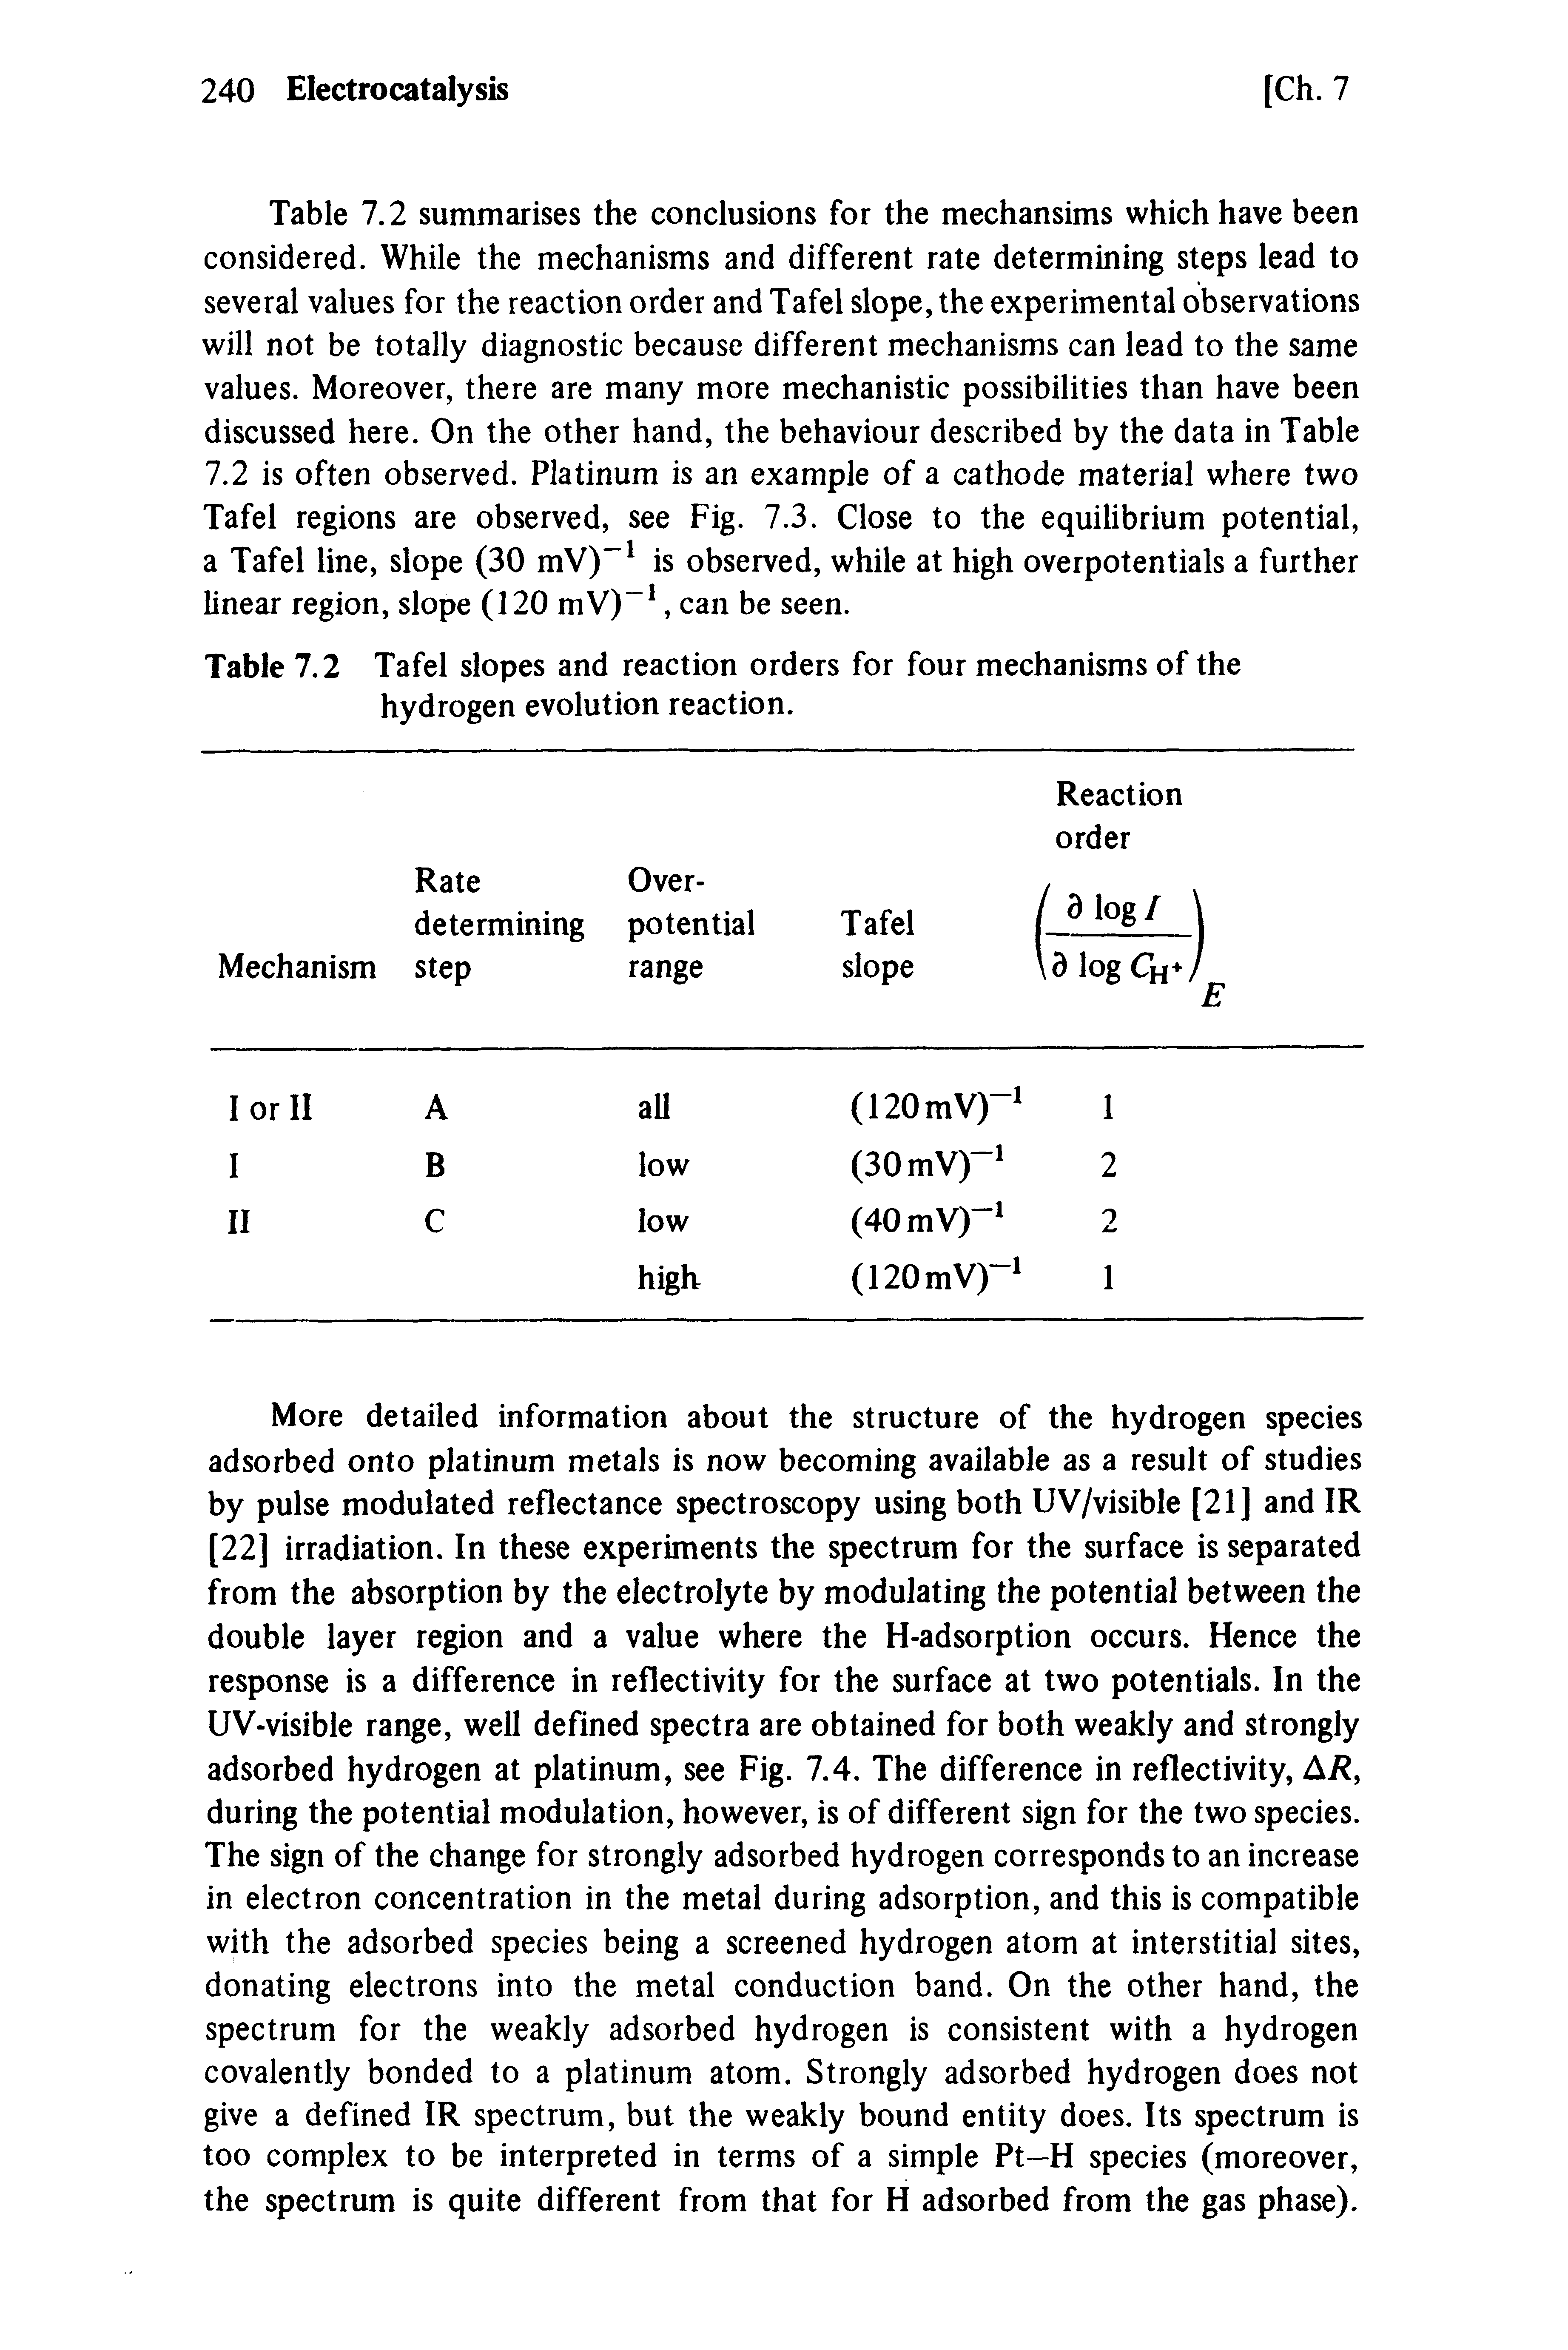 Table 7.2 Tafel slopes and reaction orders for four mechanisms of the hydrogen evolution reaction.